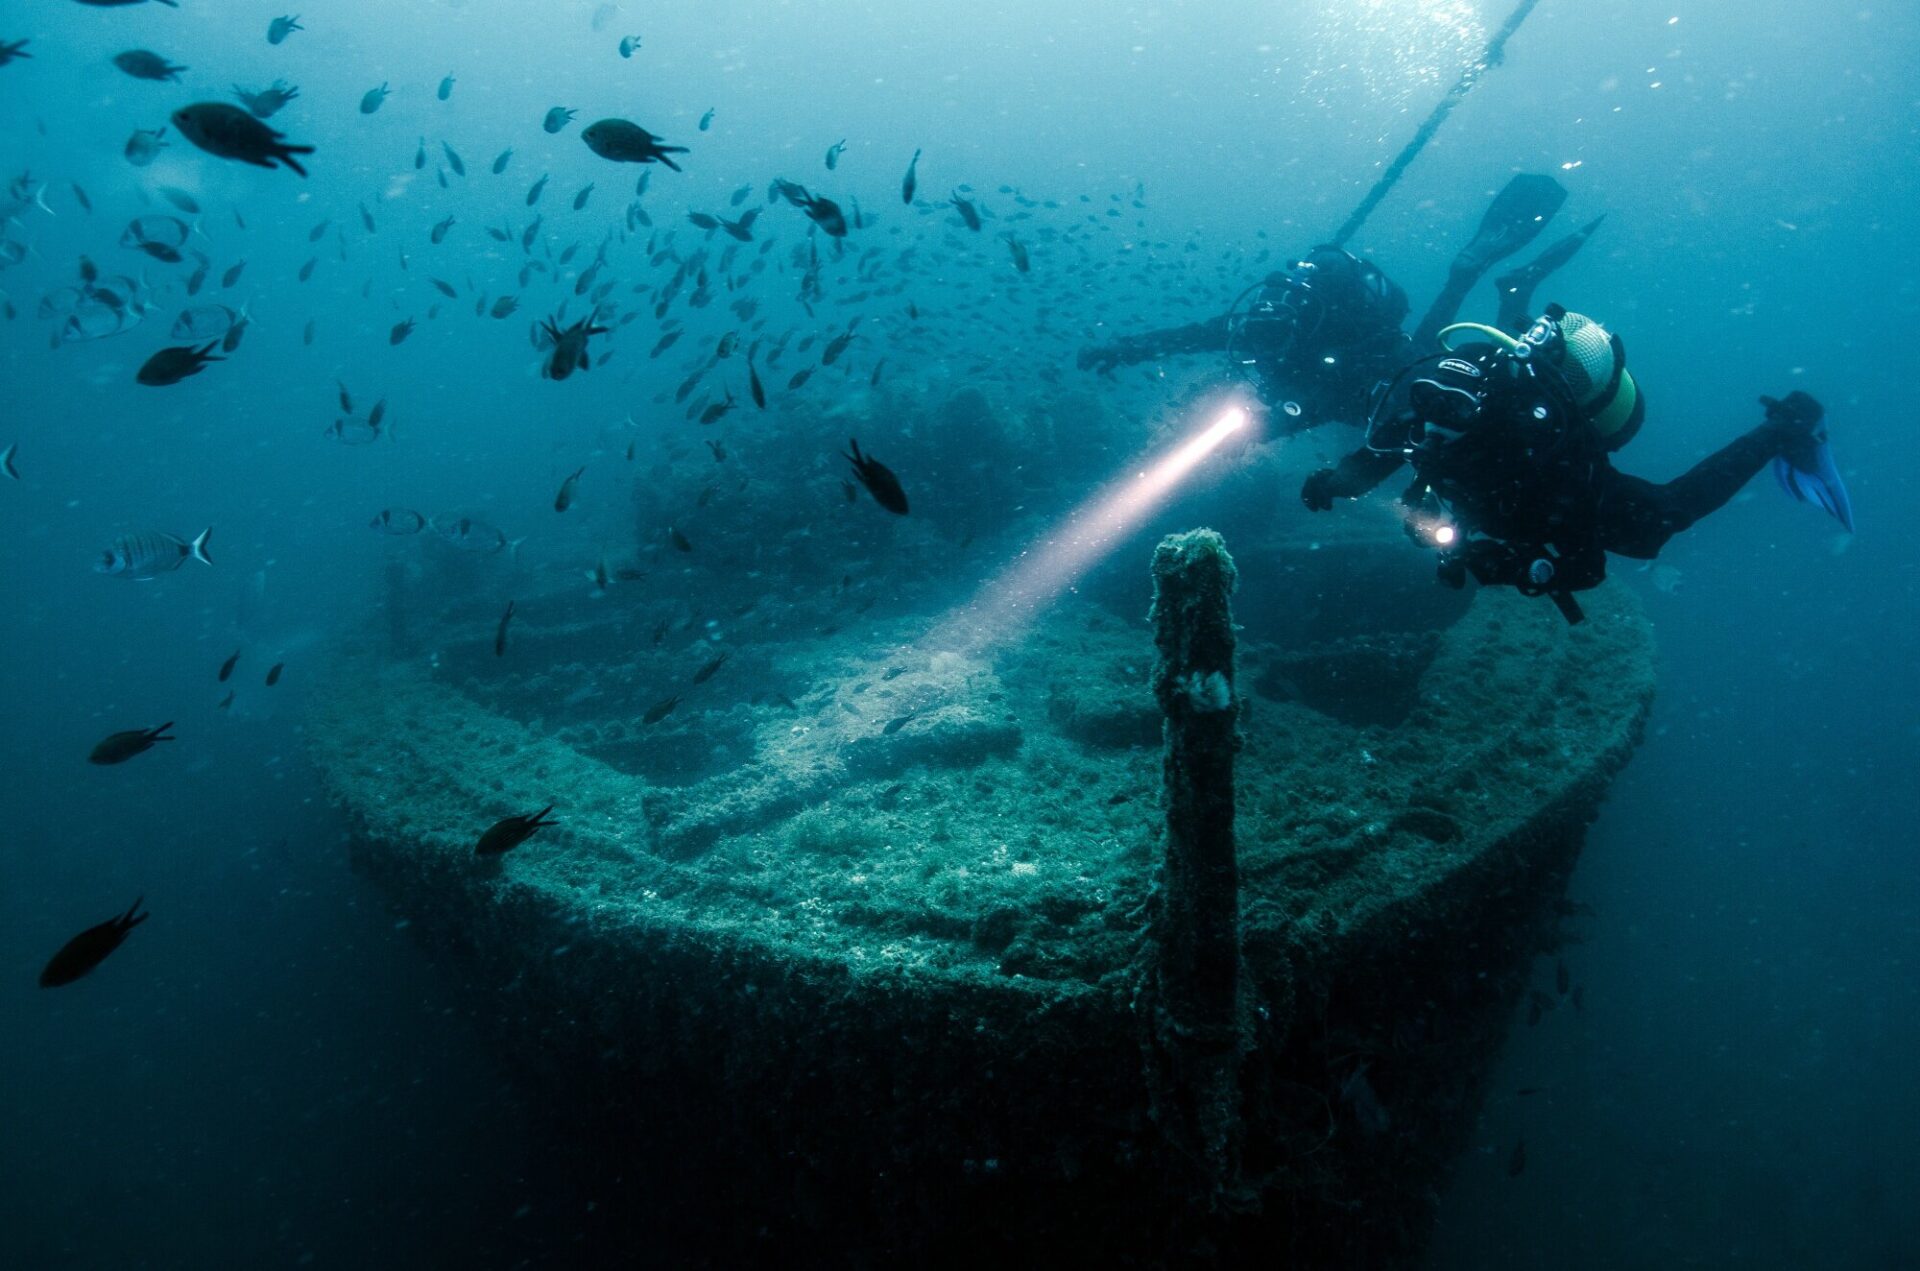 Divers explore the wreck of the cargo ship dubbed ‘Naranjito’ off the south-eastern tip of Spain. The ship’s final cargo consisted of any thousands of oranges (hence its nickname) which violently shifted in a storm, causing the boat to list and take on water.